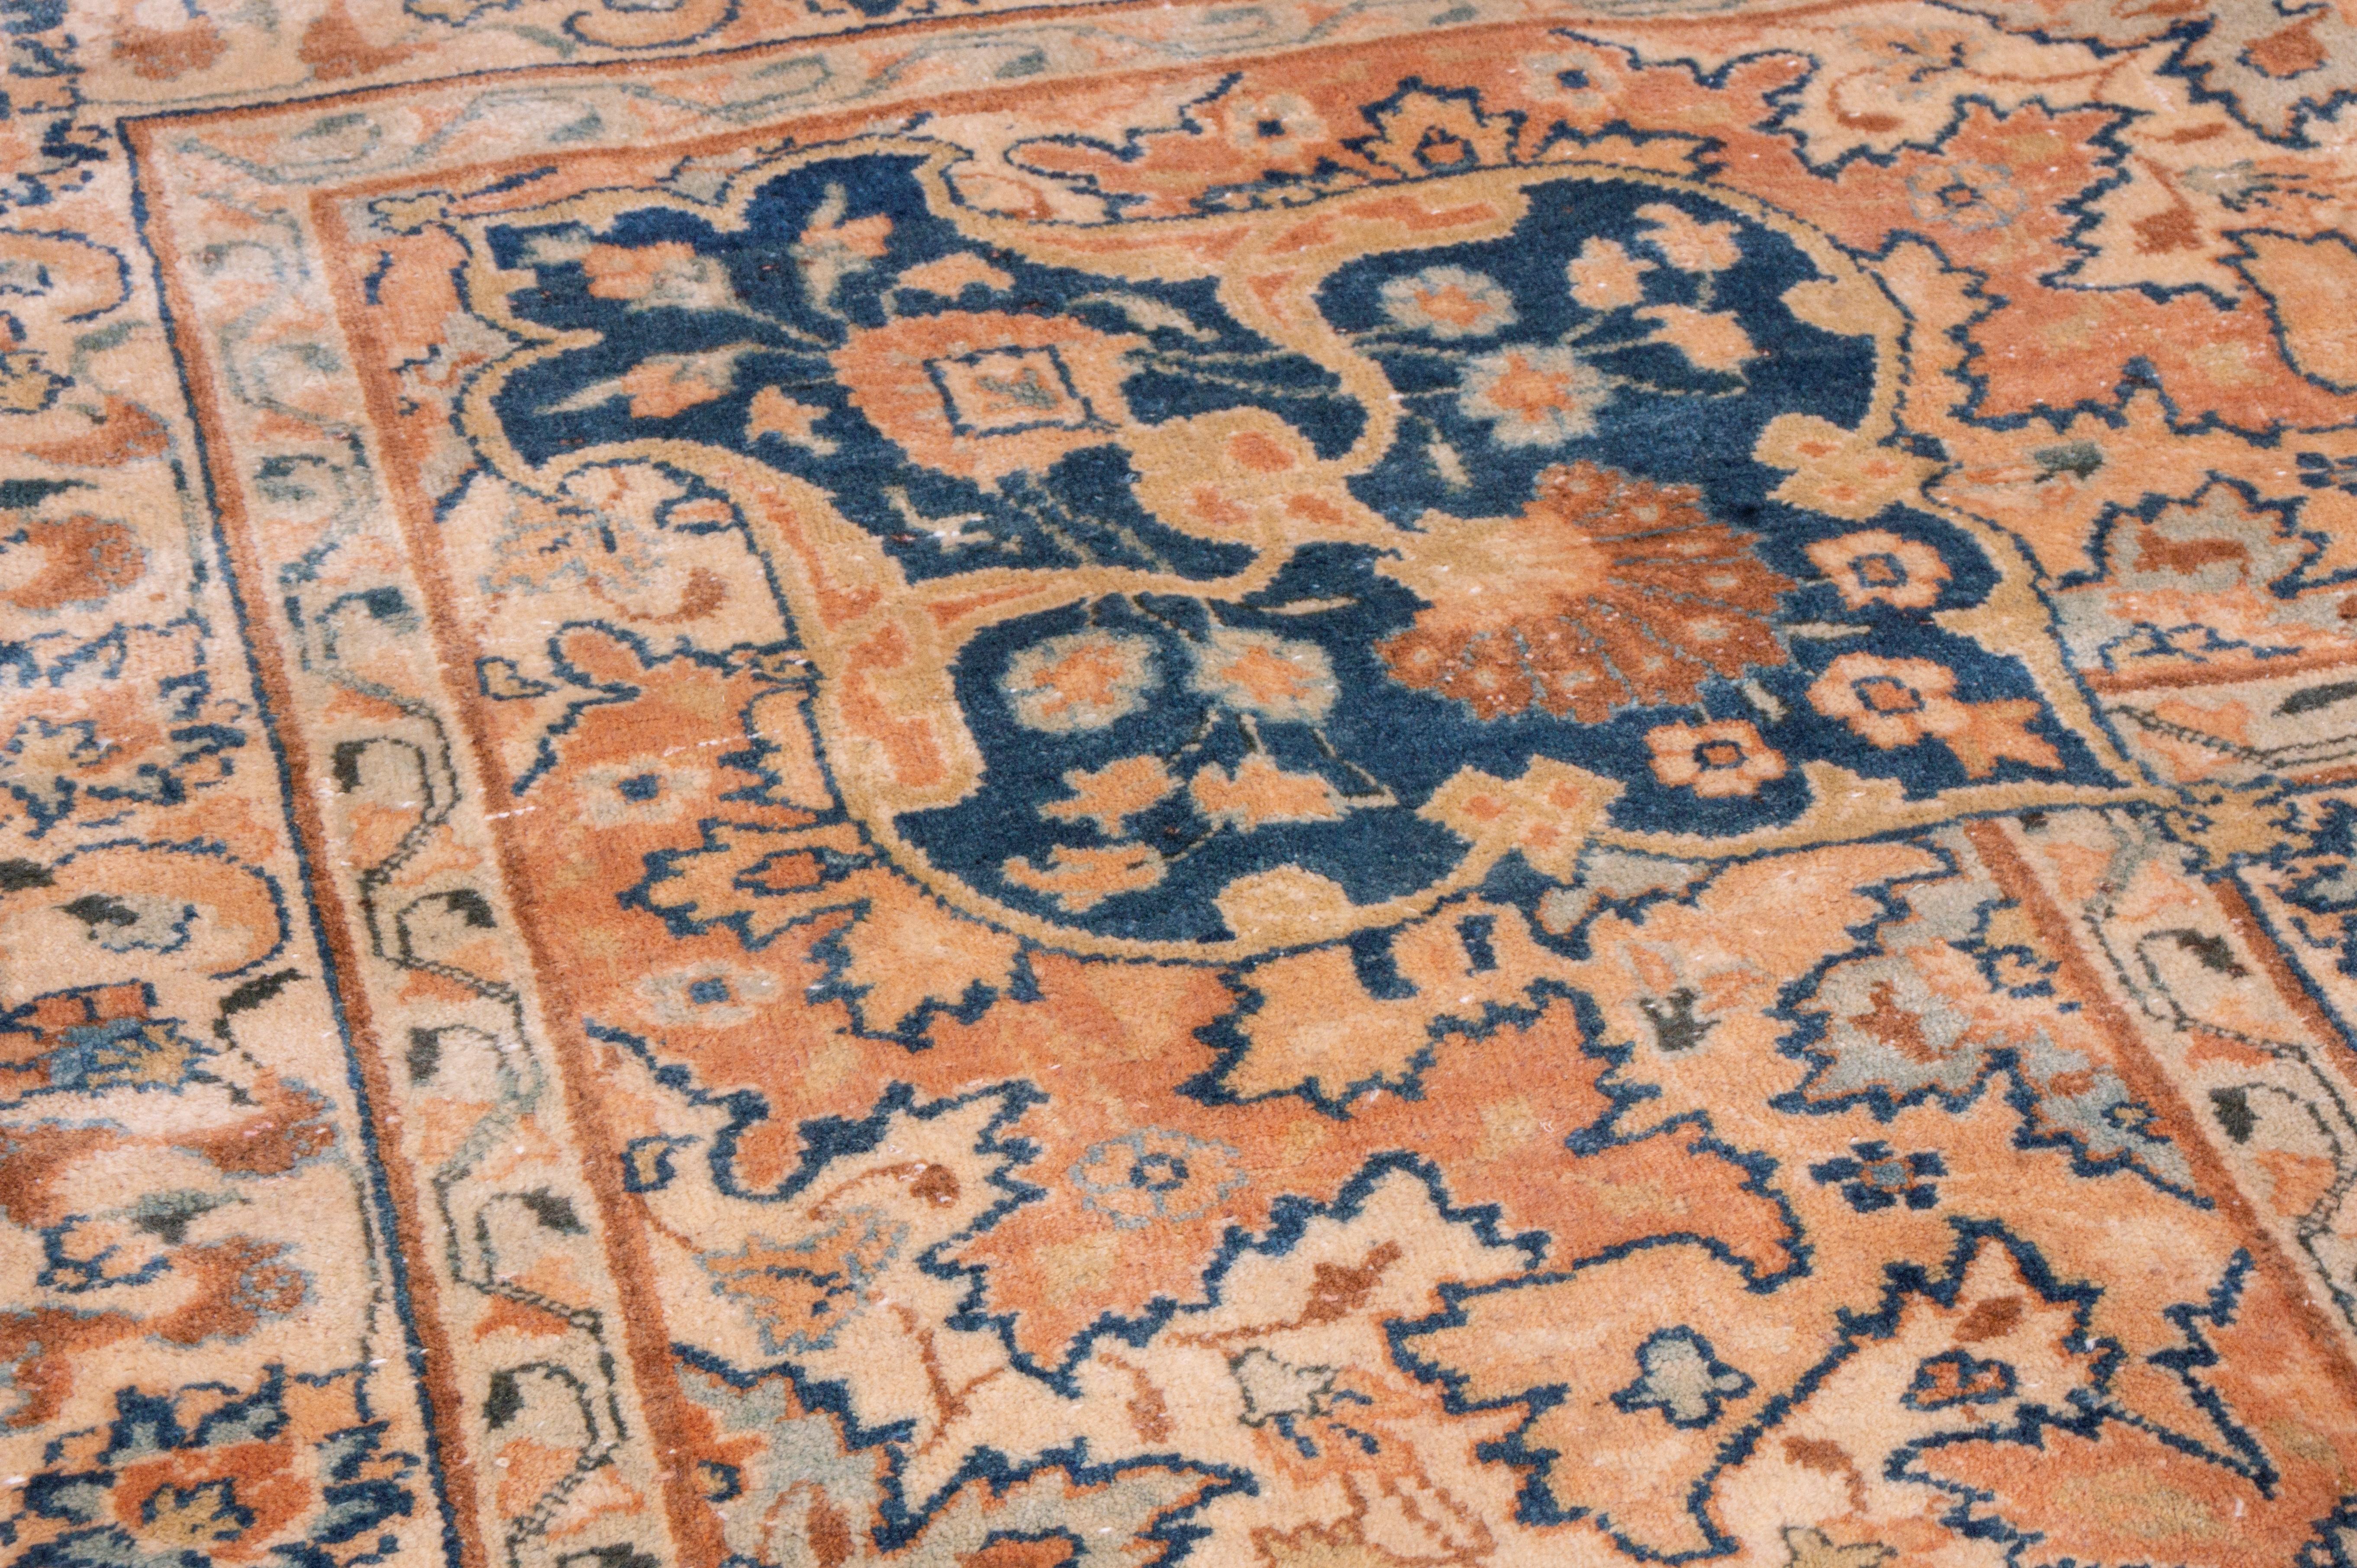 This antique traditional wool rug is from the Yazd region of Persia, originating from 1900-1920. As a region between Isfahan and Kerman, Yazd’s proximity to the latter shows in the pseudo-Kerman style all-over floral patterns, marrying caramel brown